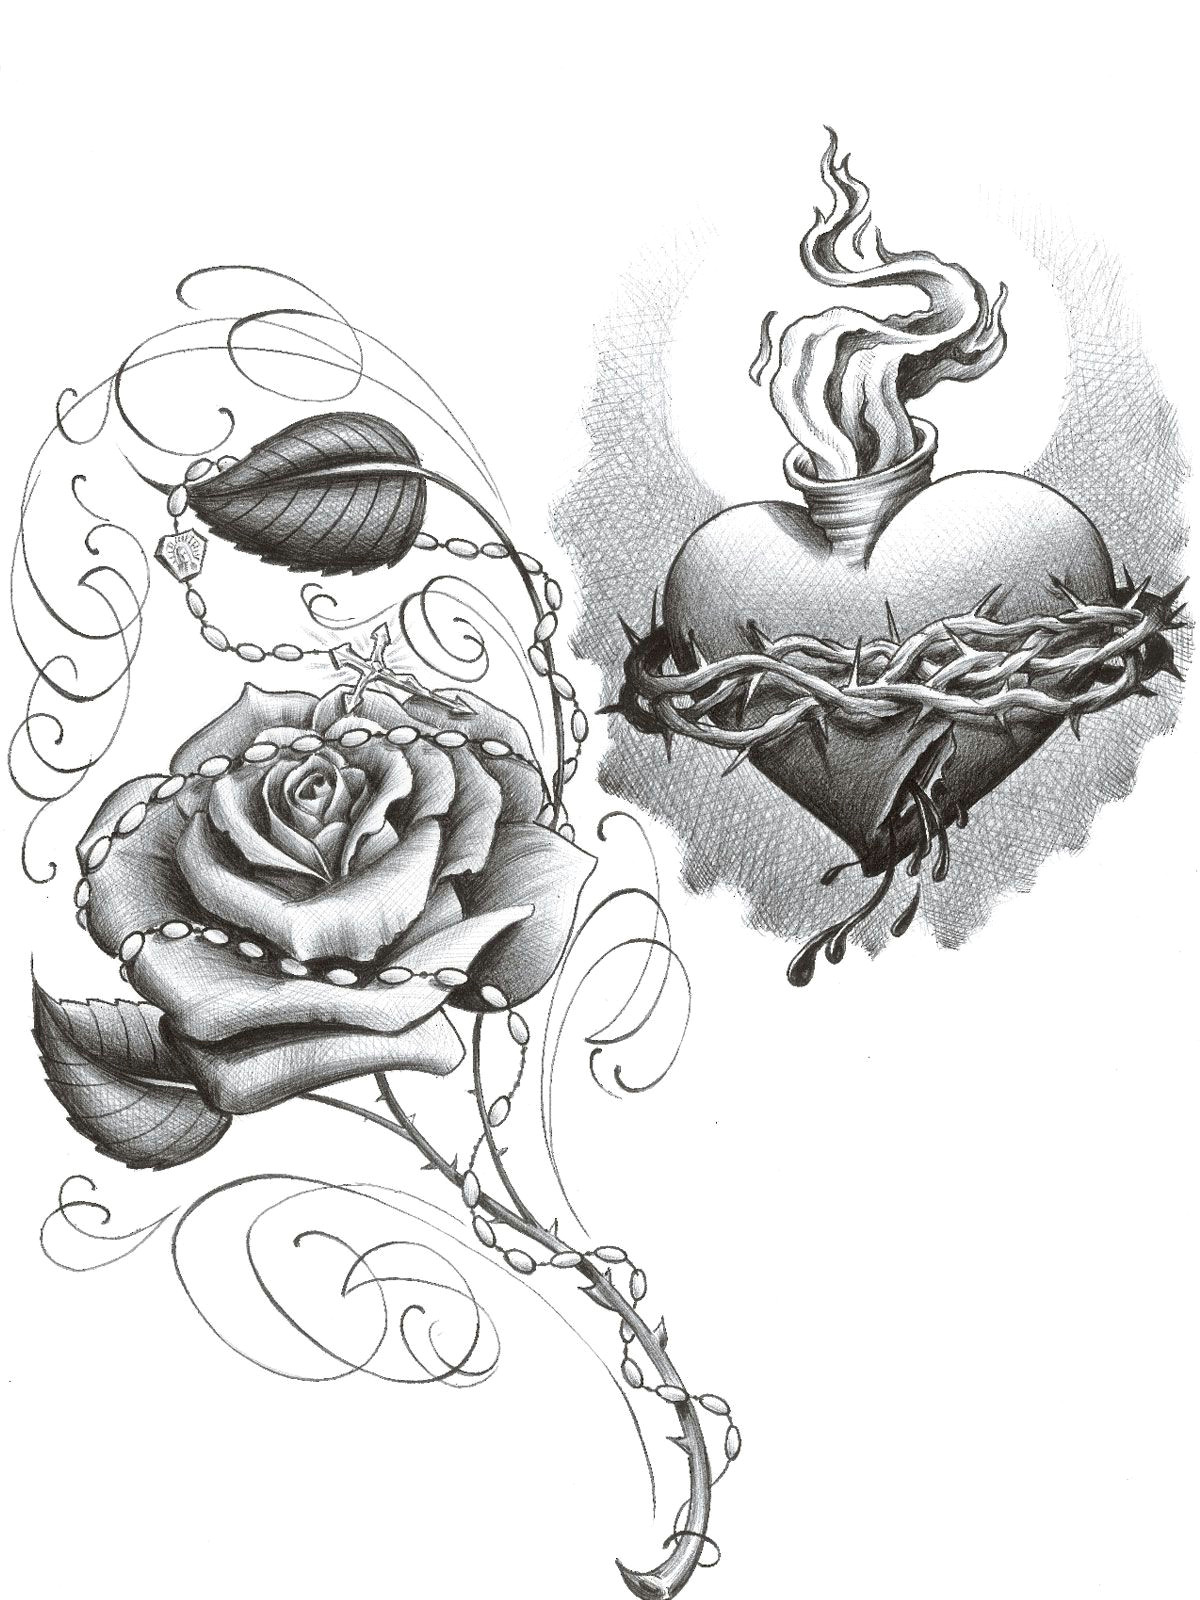 Drawing Holding A Rose Lowrider Drawings Pictures Lowrider Art Image Lowrider Art